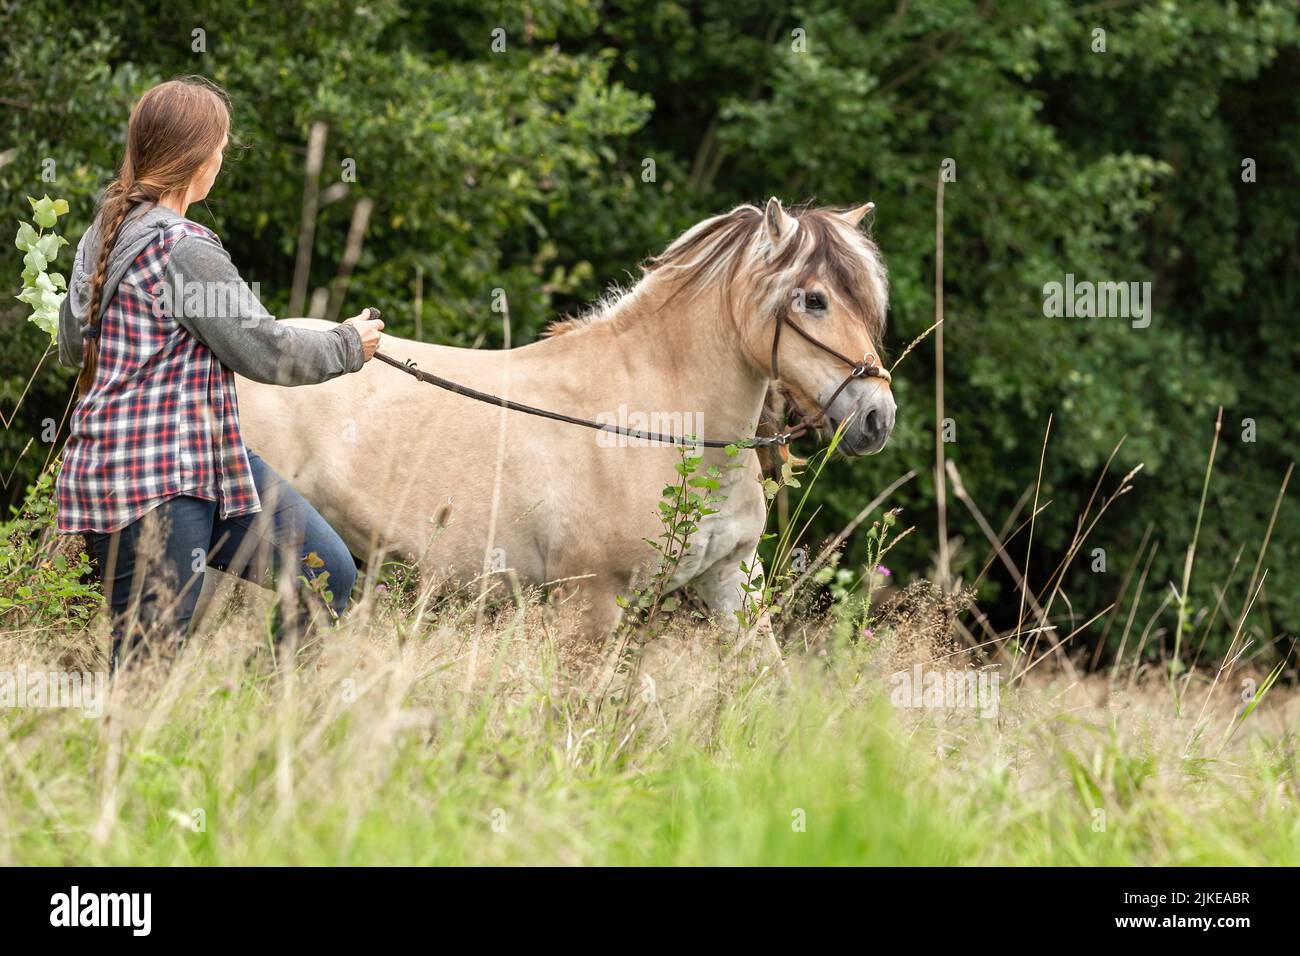 Natural horsemanship concept: A woman working with her norwegian fjord horse on a longe rope in summer outdoors. Equestrian and horse bonding Stock Photo